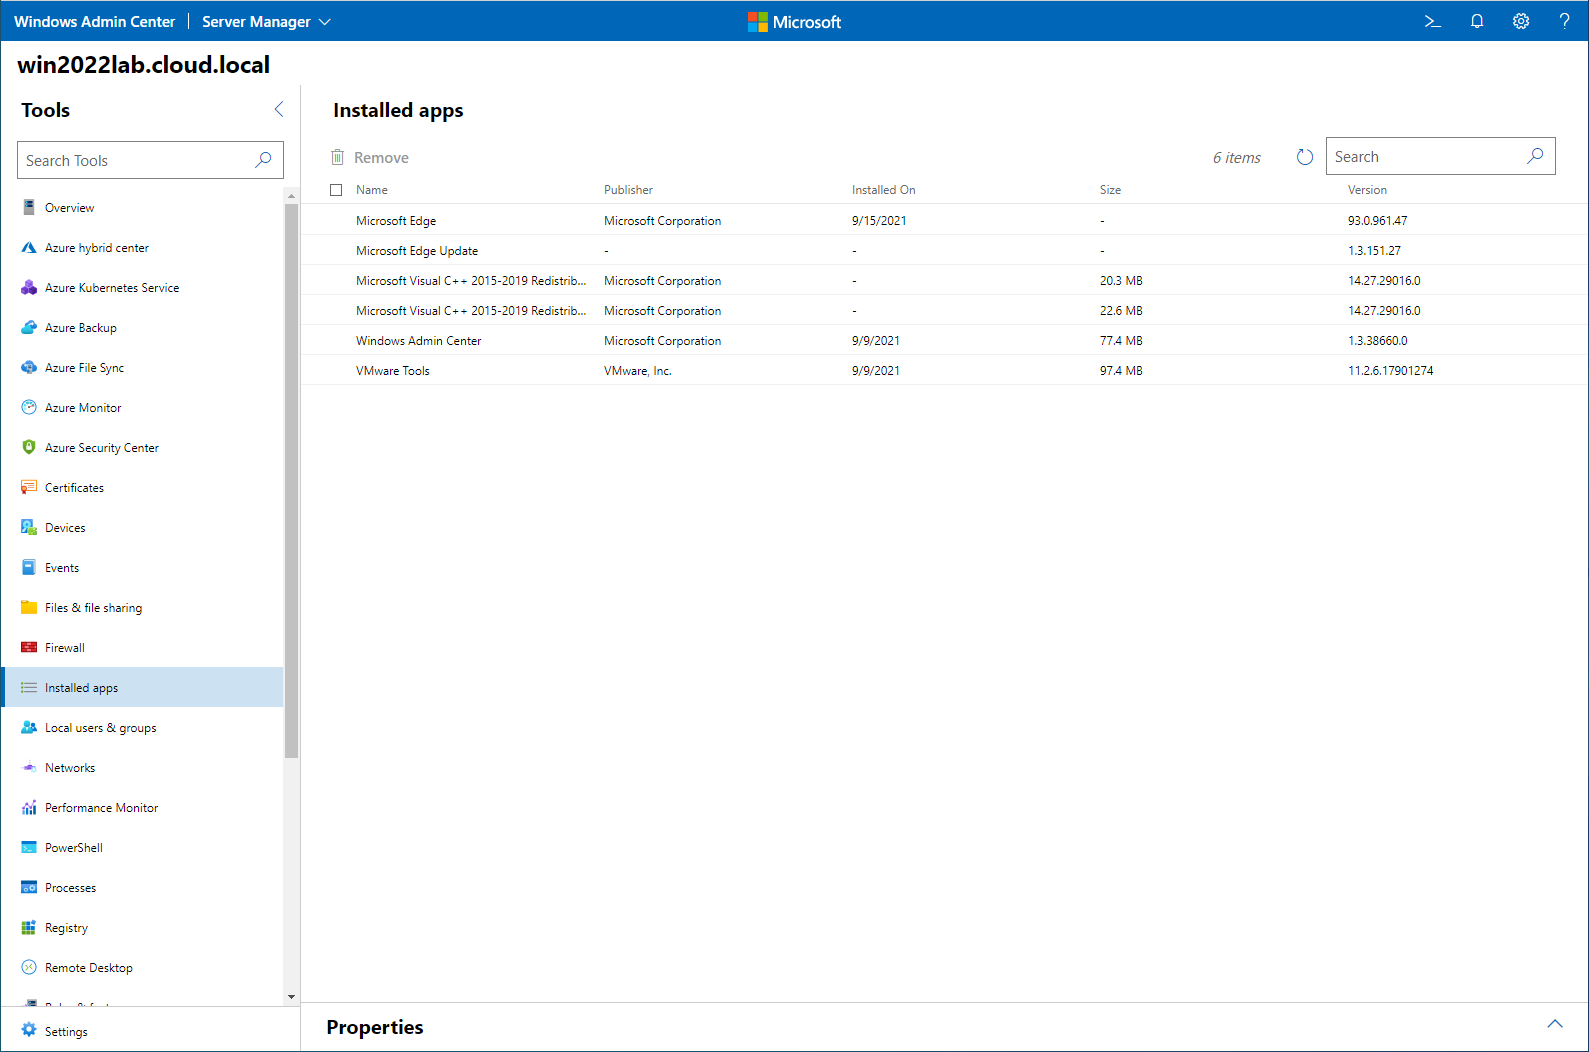 Manage installed applications in Windows Admin Center